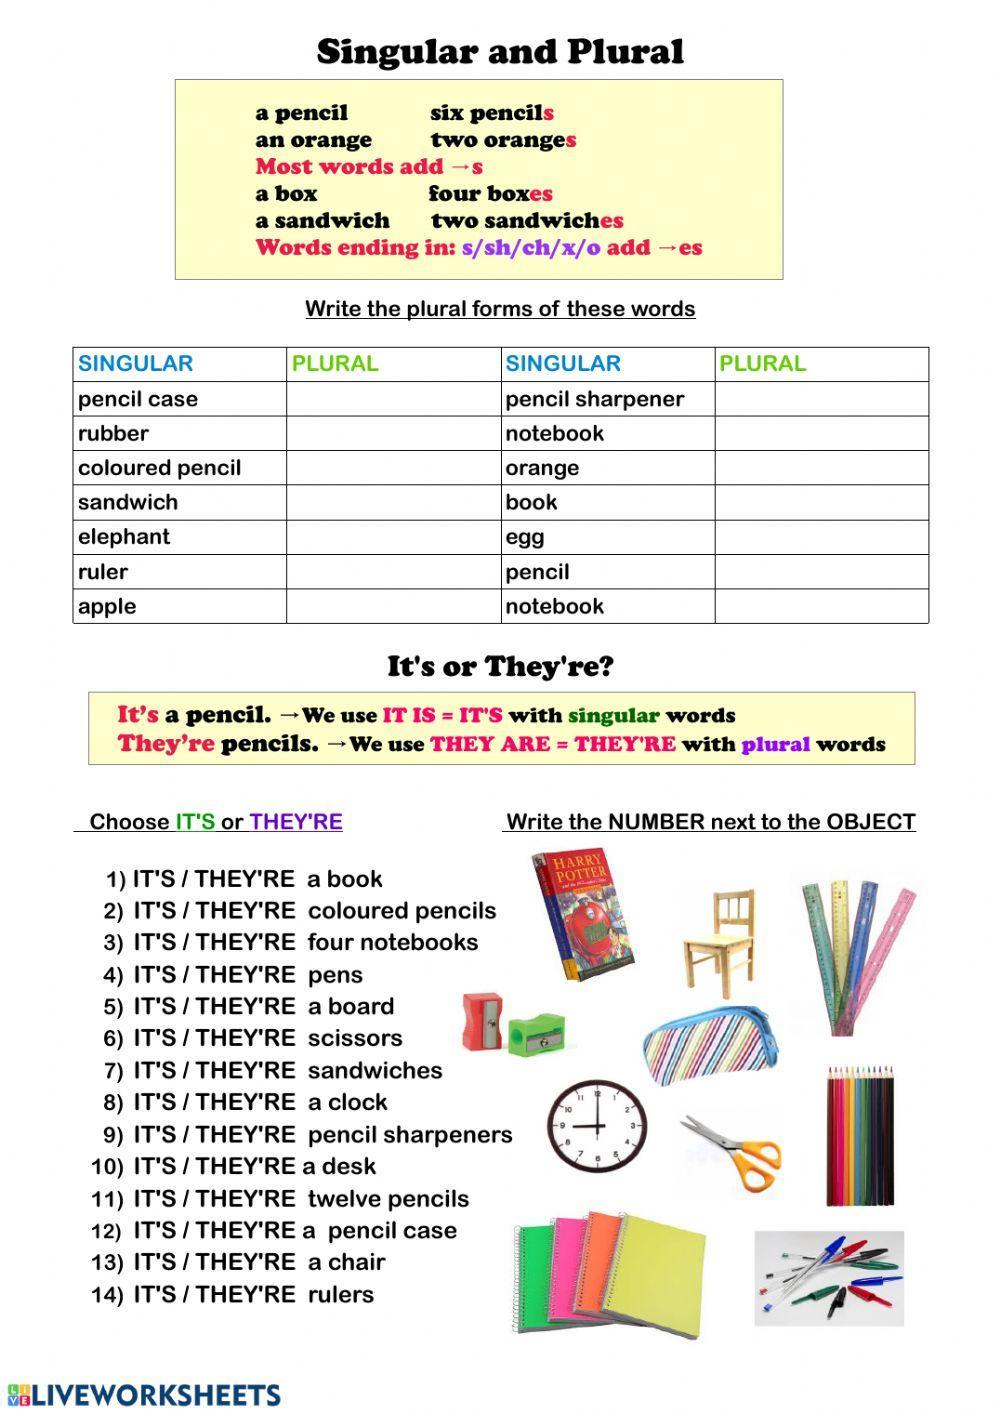 Singular and plural - school objects